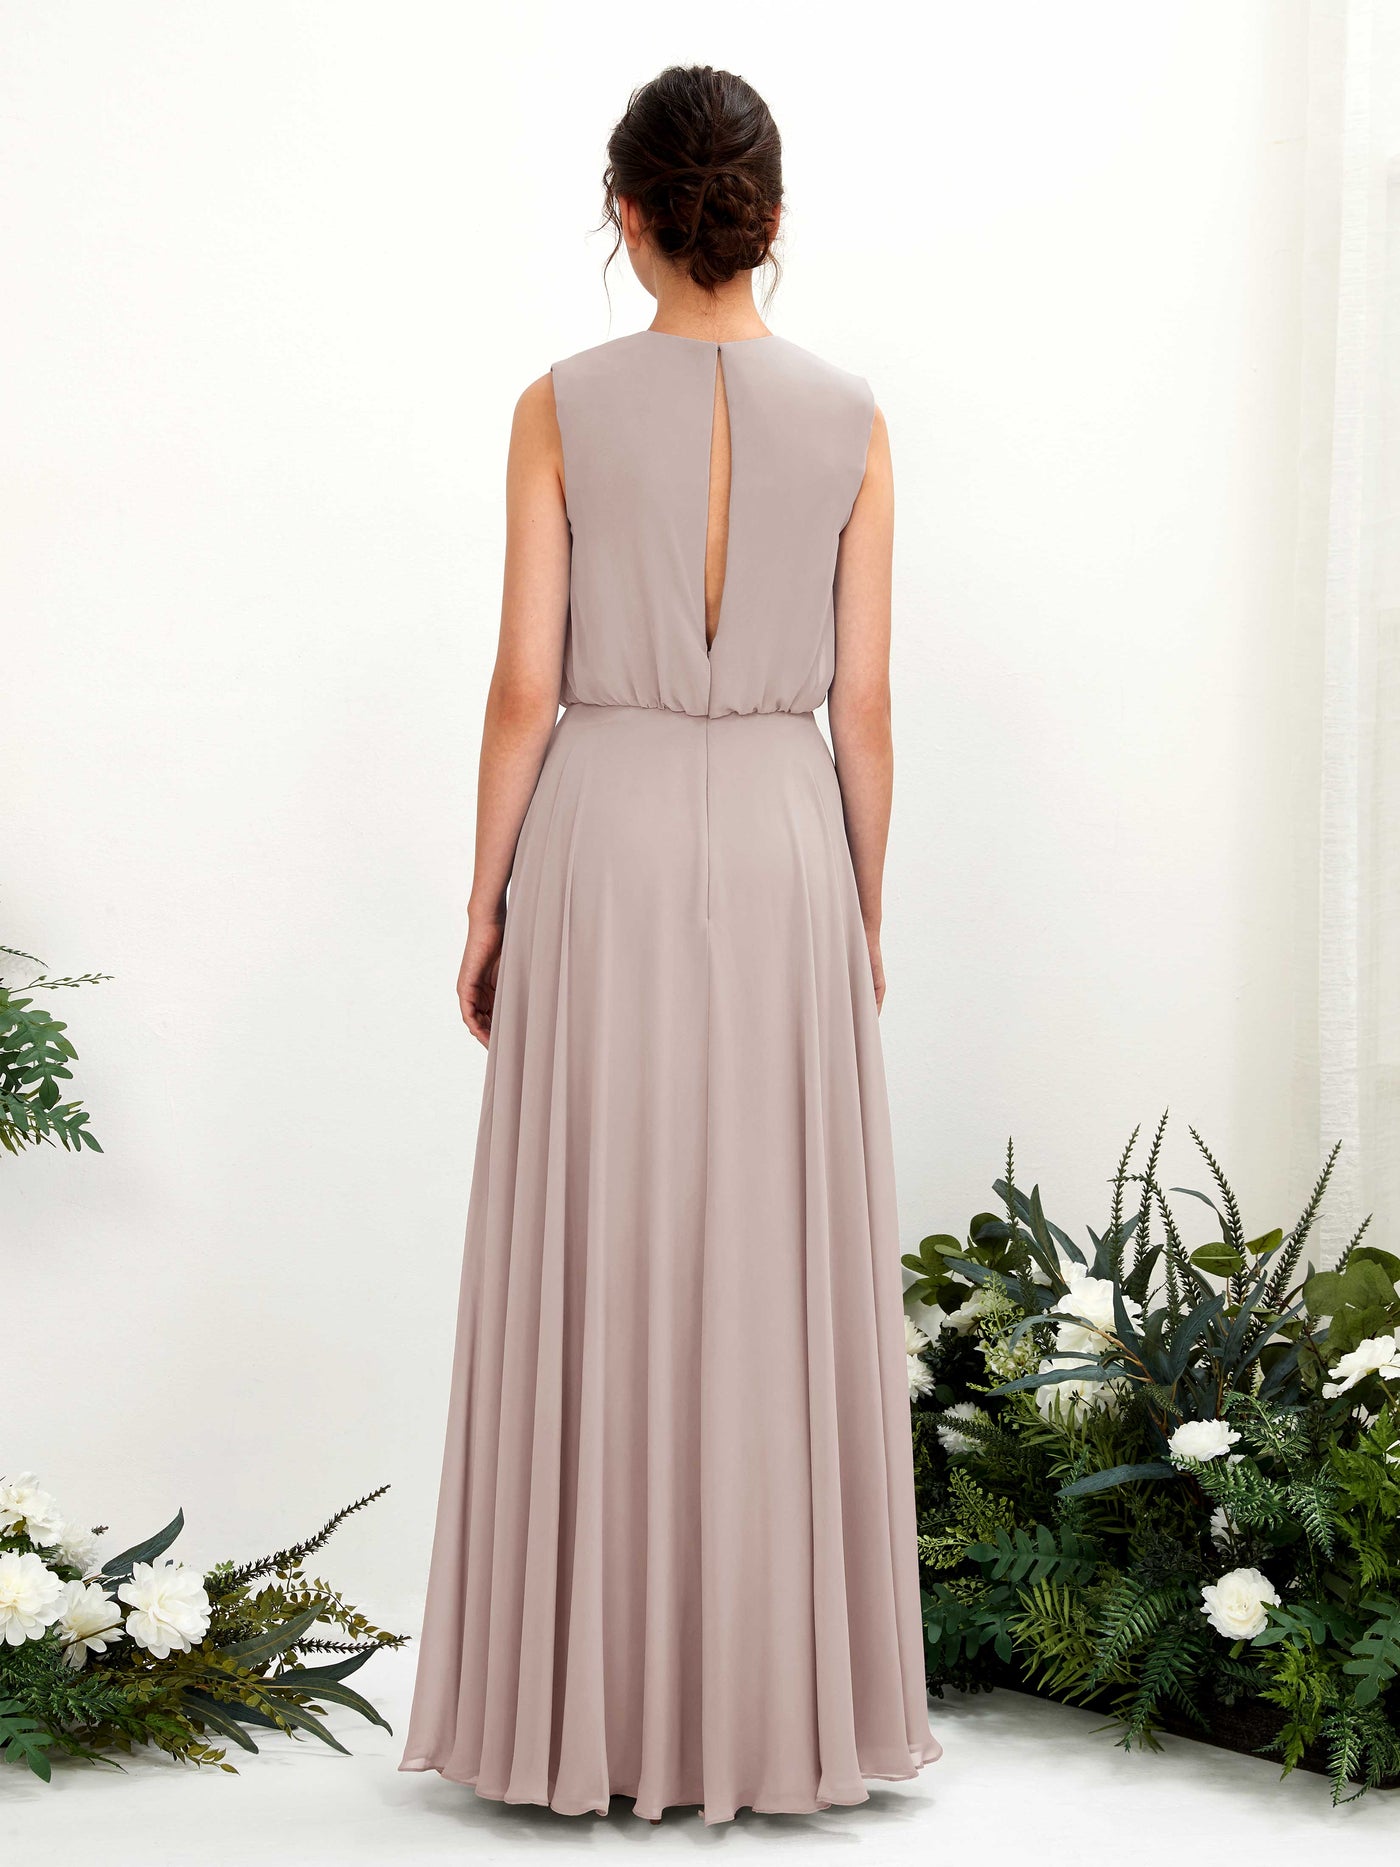 Taupe Bridesmaid Dresses Bridesmaid Dress A-line Chiffon Round Full Length Sleeveless Wedding Party Dress (81222824)#color_taupe